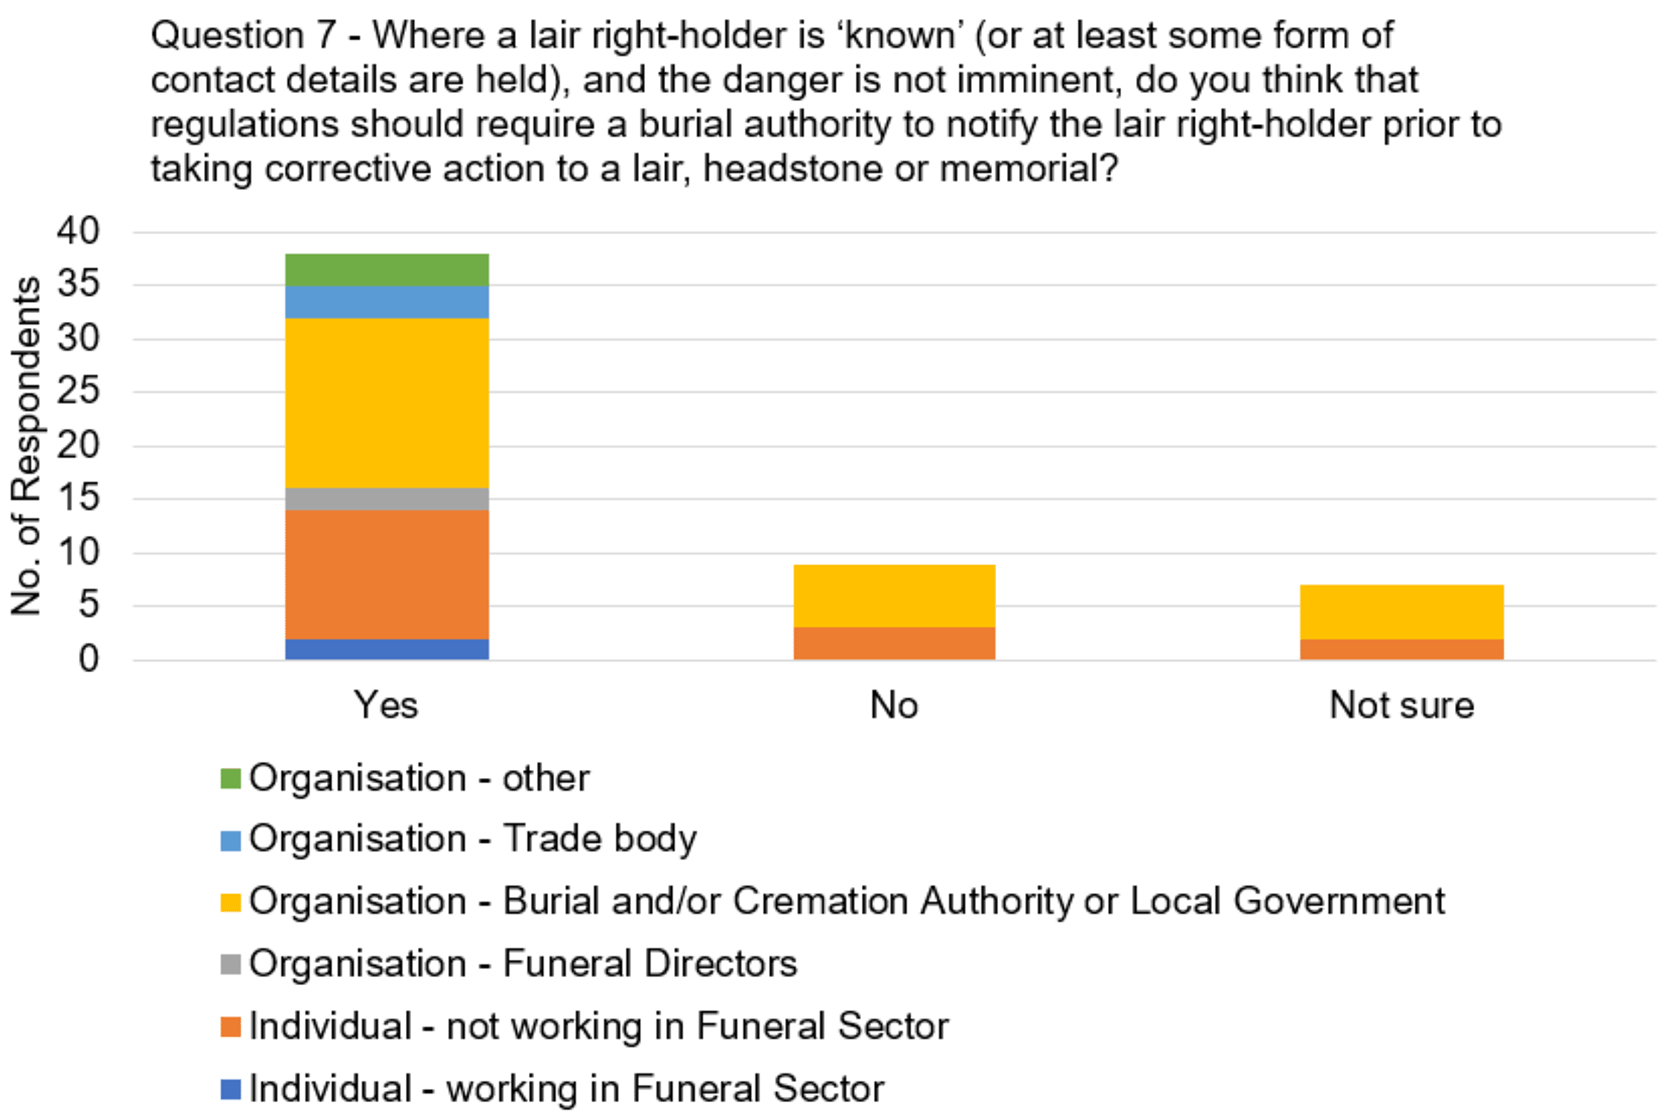 The graph visually presents the data from table 7, focussing on the responses to the question, "Where a lair right-holder is ‘known’ (or at least some form of contact details are held), and the danger is not imminent, do you think that regulations should require a burial authority to notify the lair right-holder prior to taking corrective action to a lair, headstone or memorial?"Figure 6. Responses to Q7 broken down by respondent type